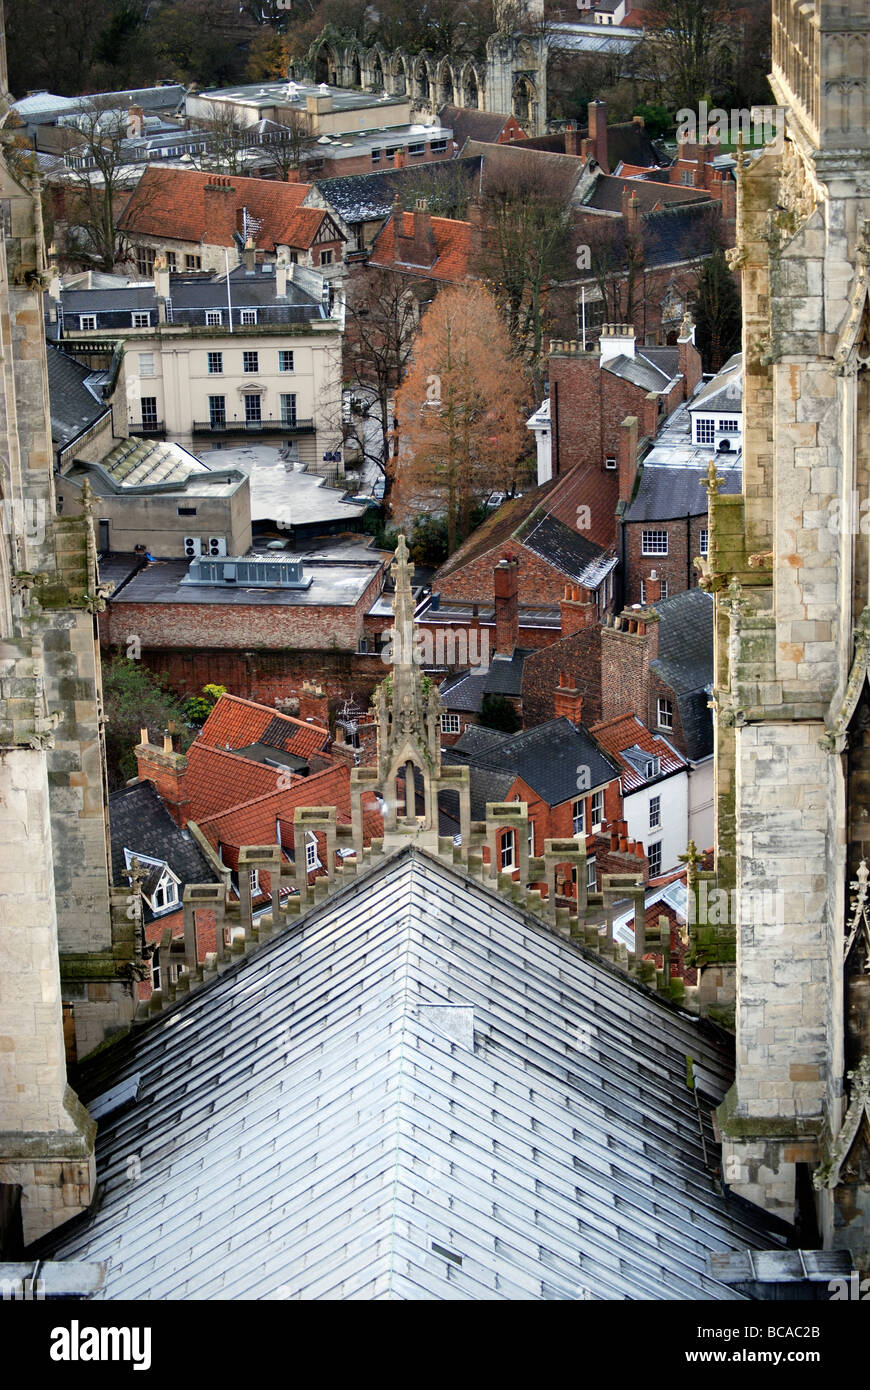 View from the central tower at York Minster looking down to the city below Stock Photo